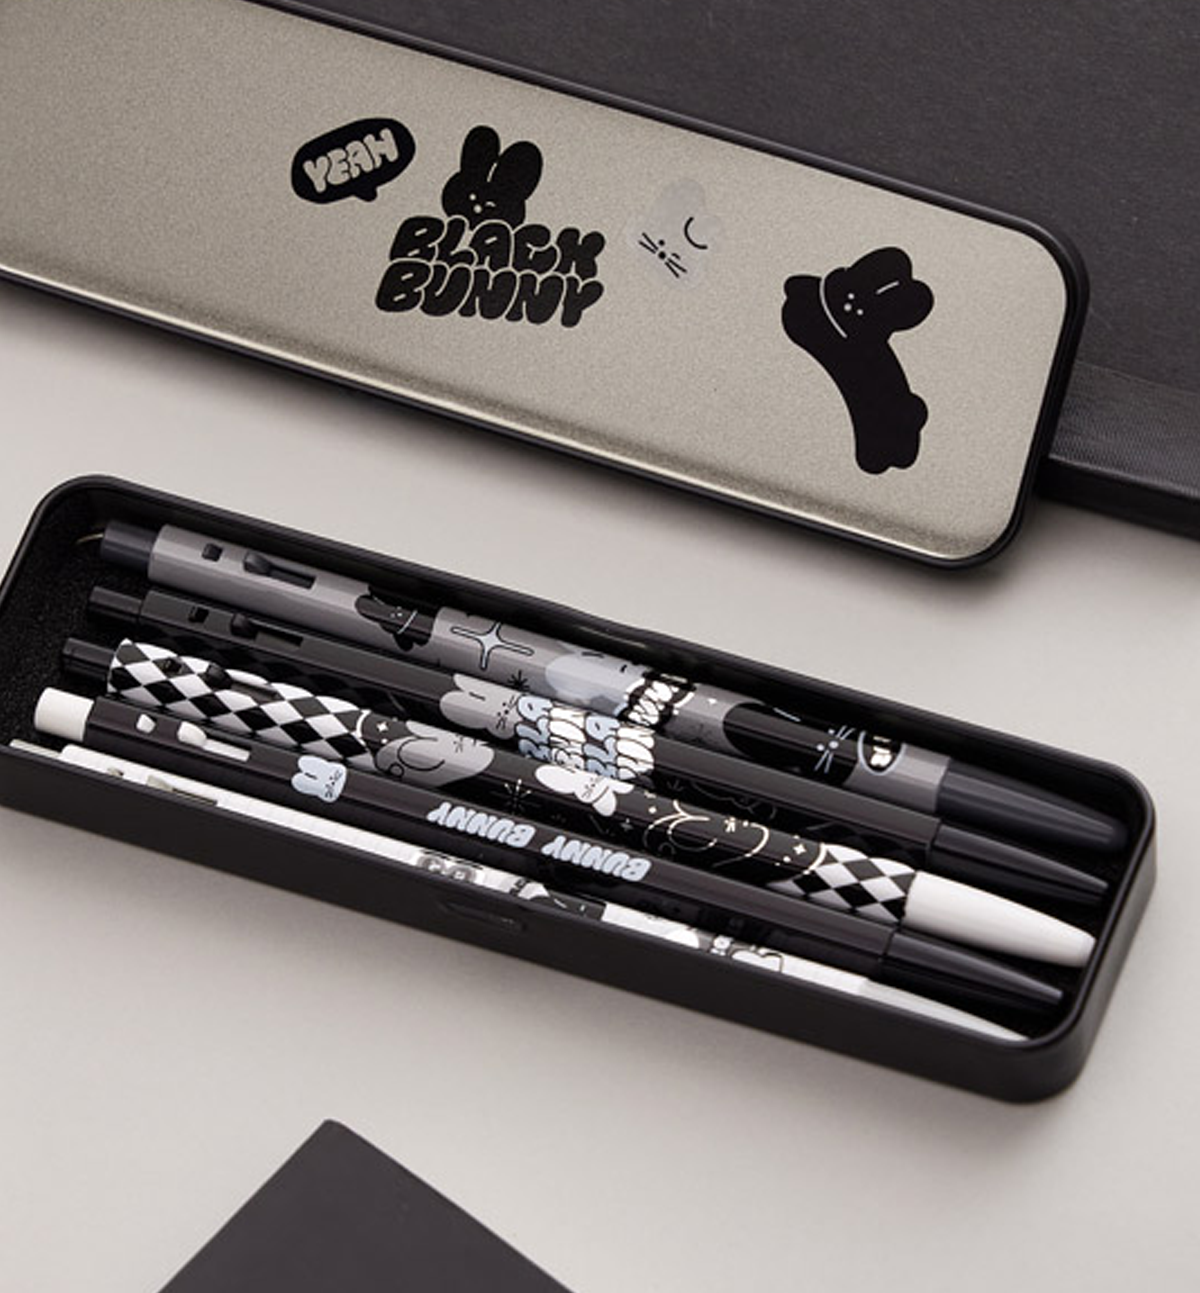 Black Bunny Pens [Limited Edition]